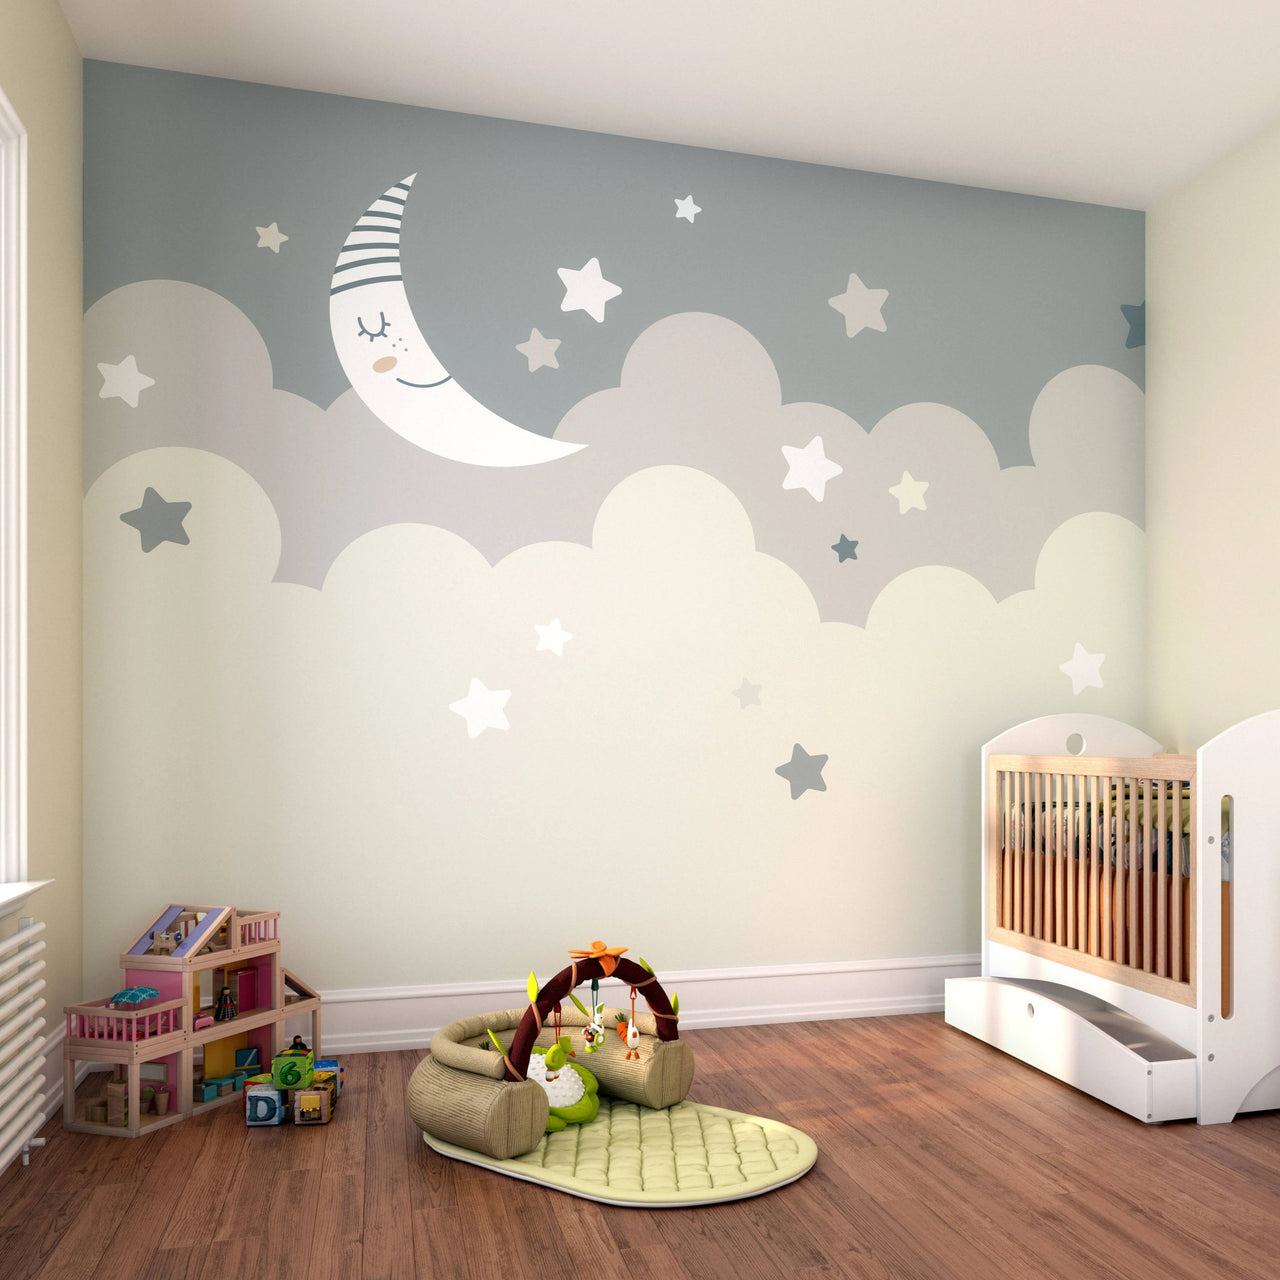 Nighttime Children's Sky Wall Mural - Rooms for Rascals, a Leafy Lanes Retailers Ltd business